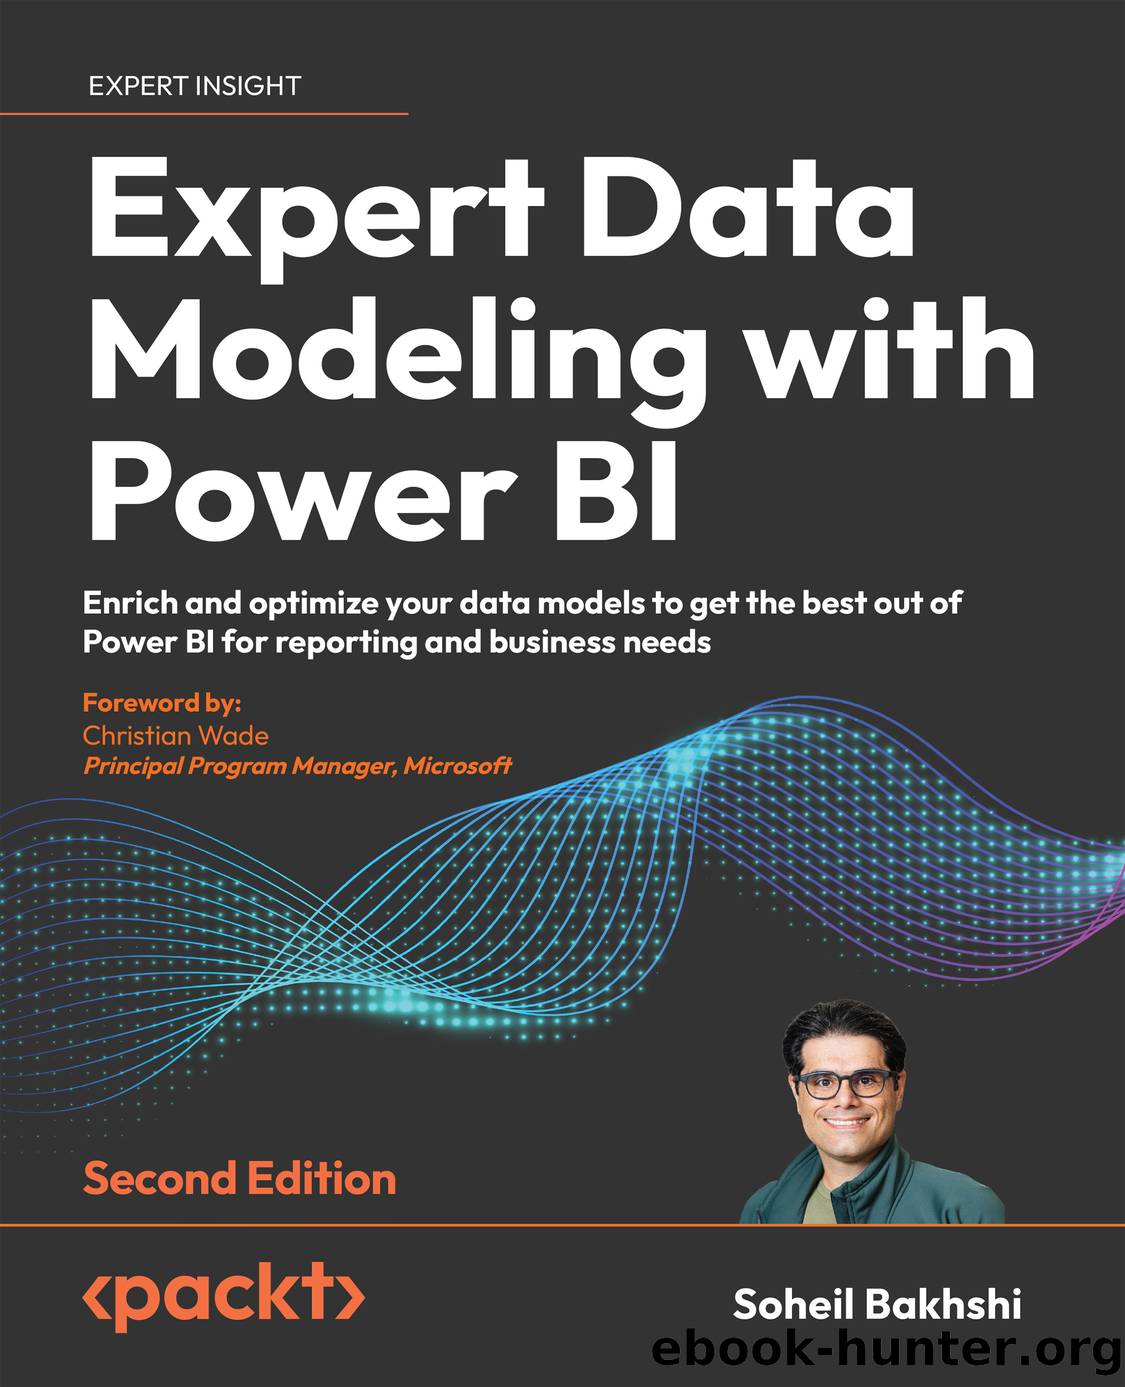 Expert Data Modeling with Power BI - Second Edition by Soheil Bakhshi